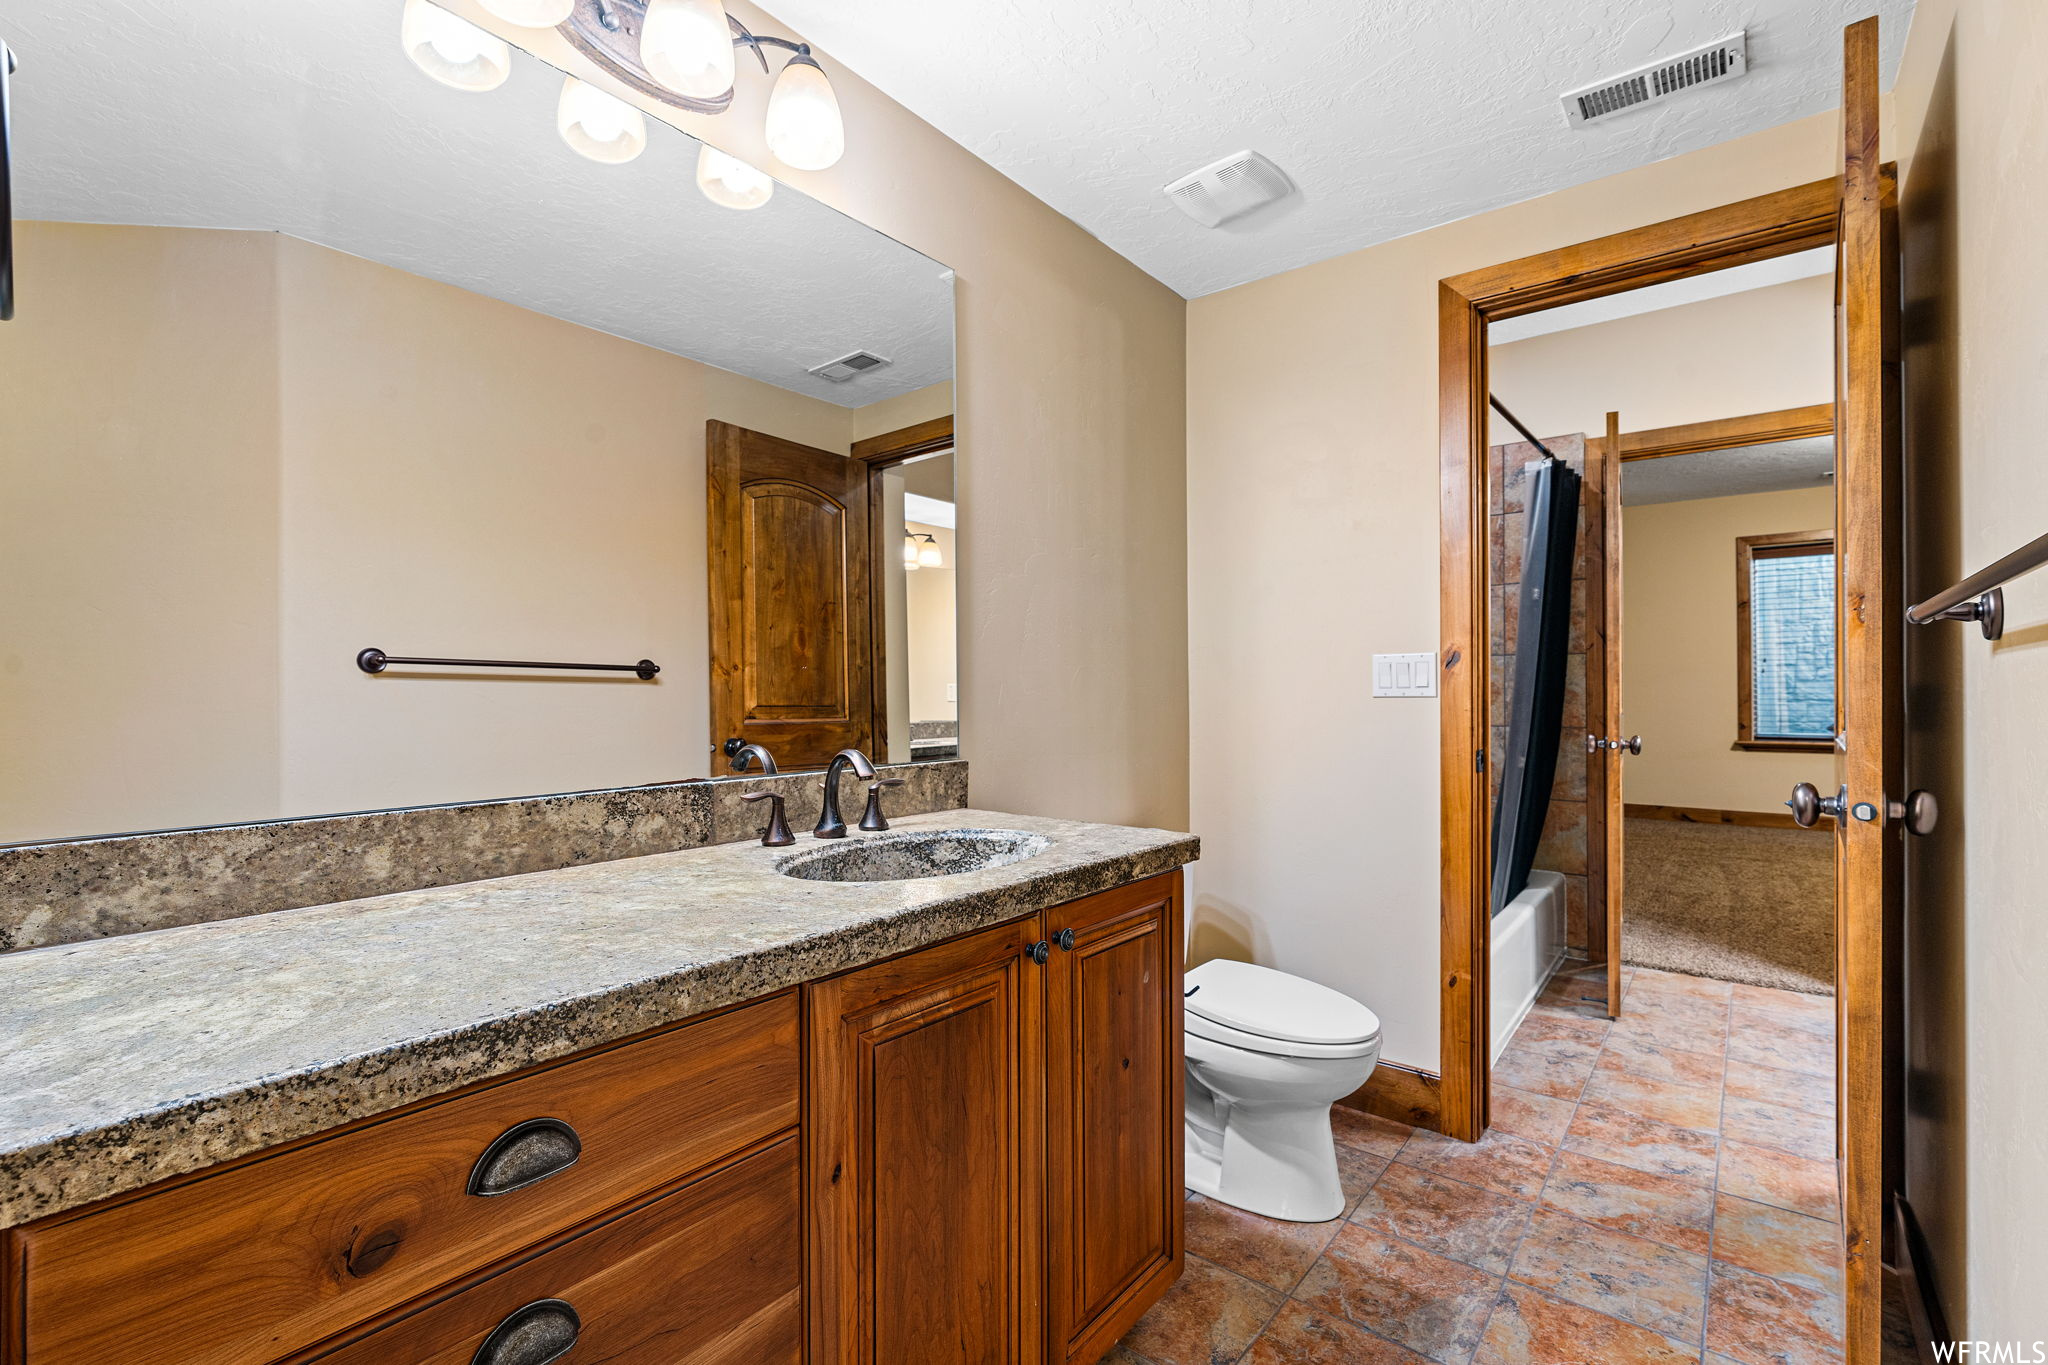 Full bathroom with tile flooring, toilet, vanity, a textured ceiling, and shower / tub combo with curtain